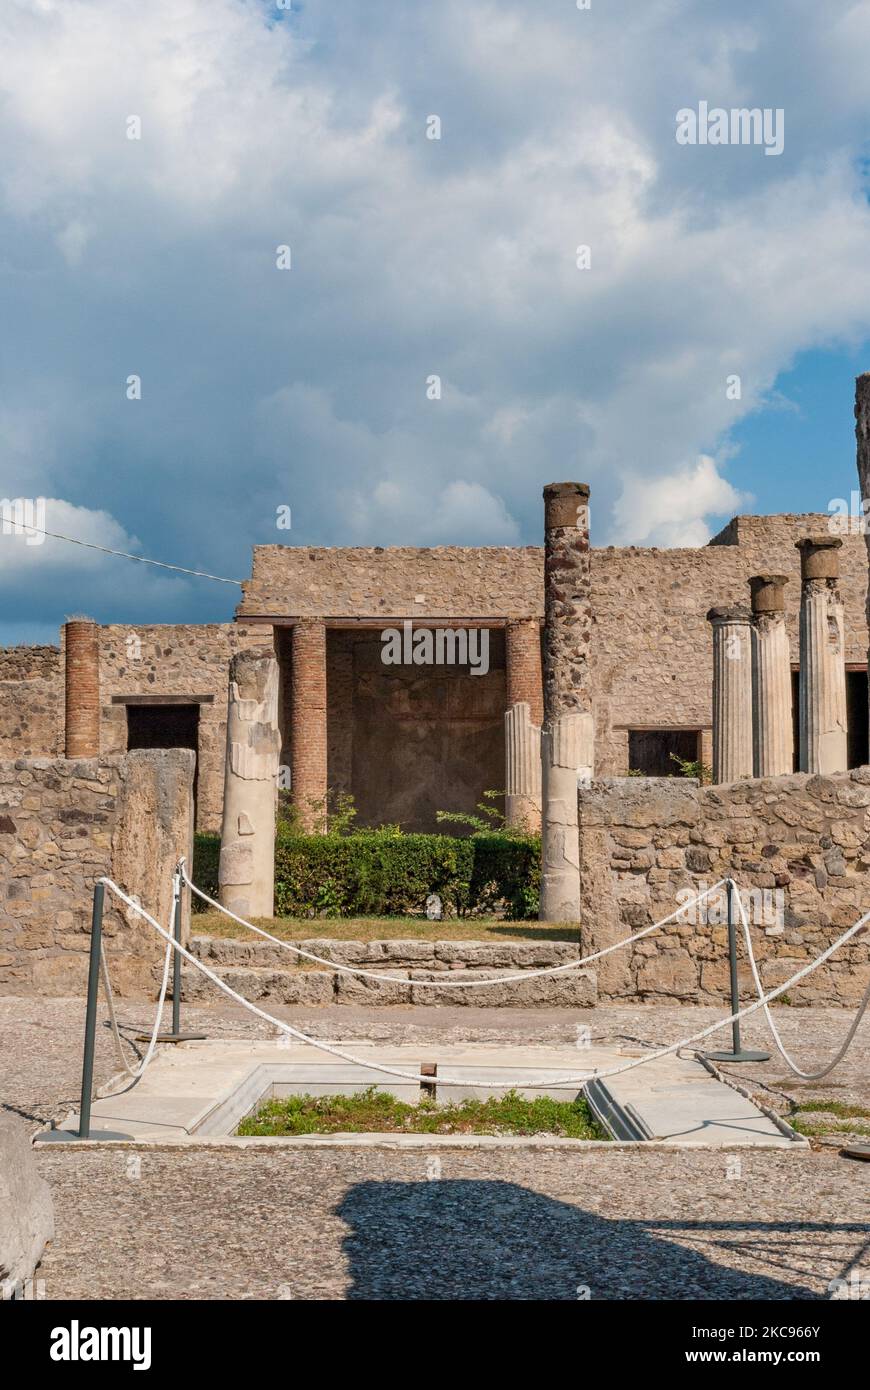 Ancient ruins in Pompei, ancient Roman city in southern Italy Stock Photo